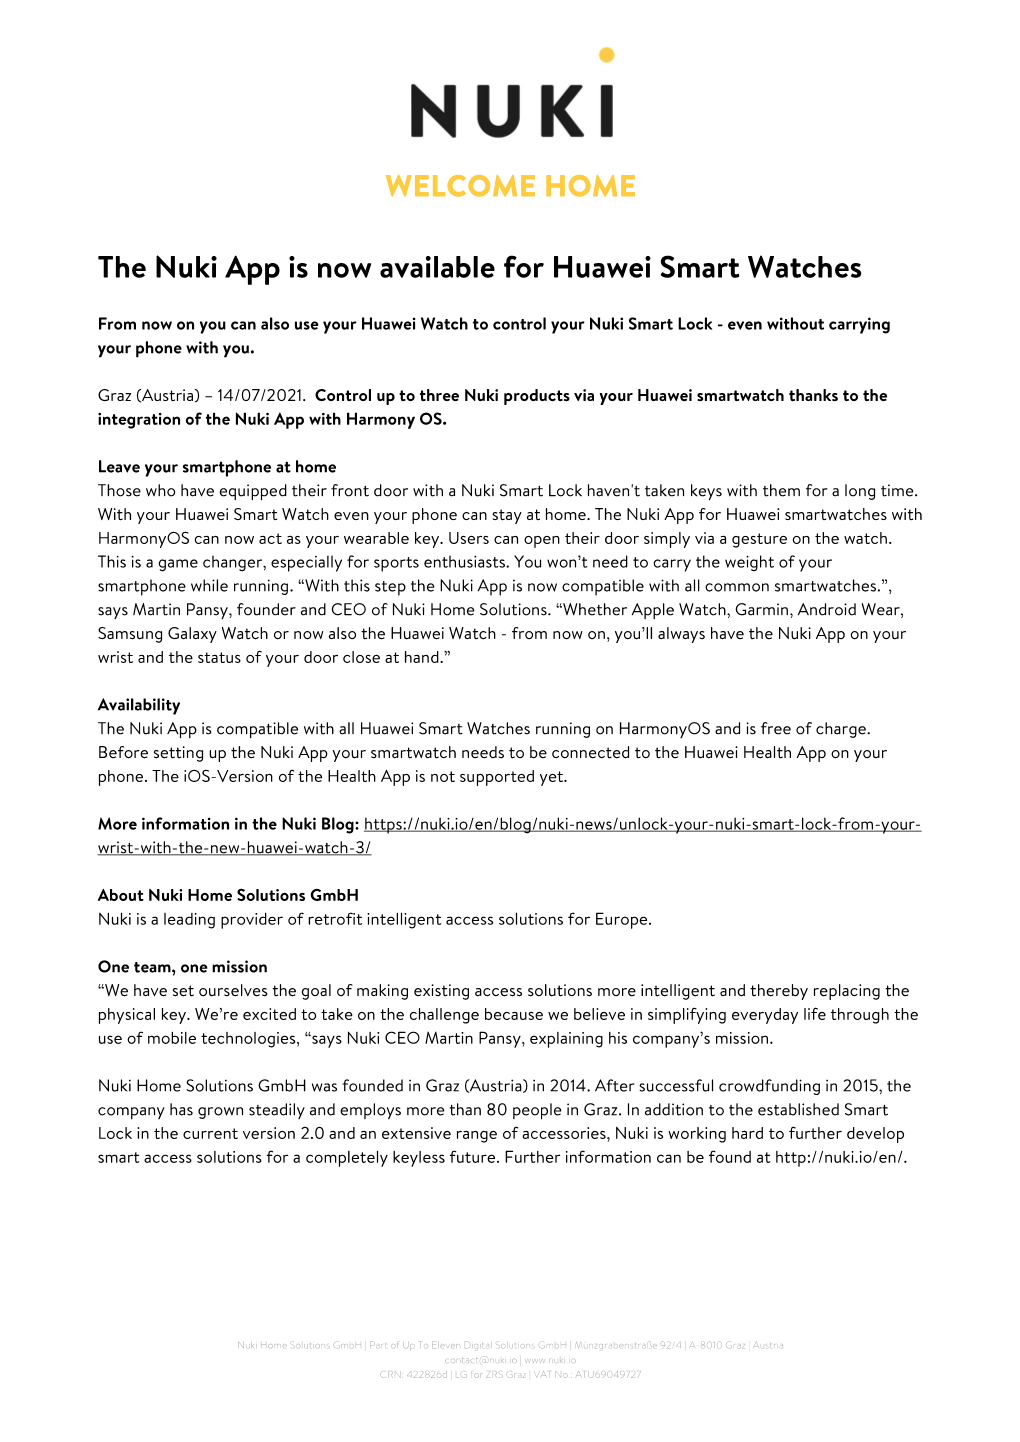 The Nuki App Is Now Available for Huawei Smart Watches